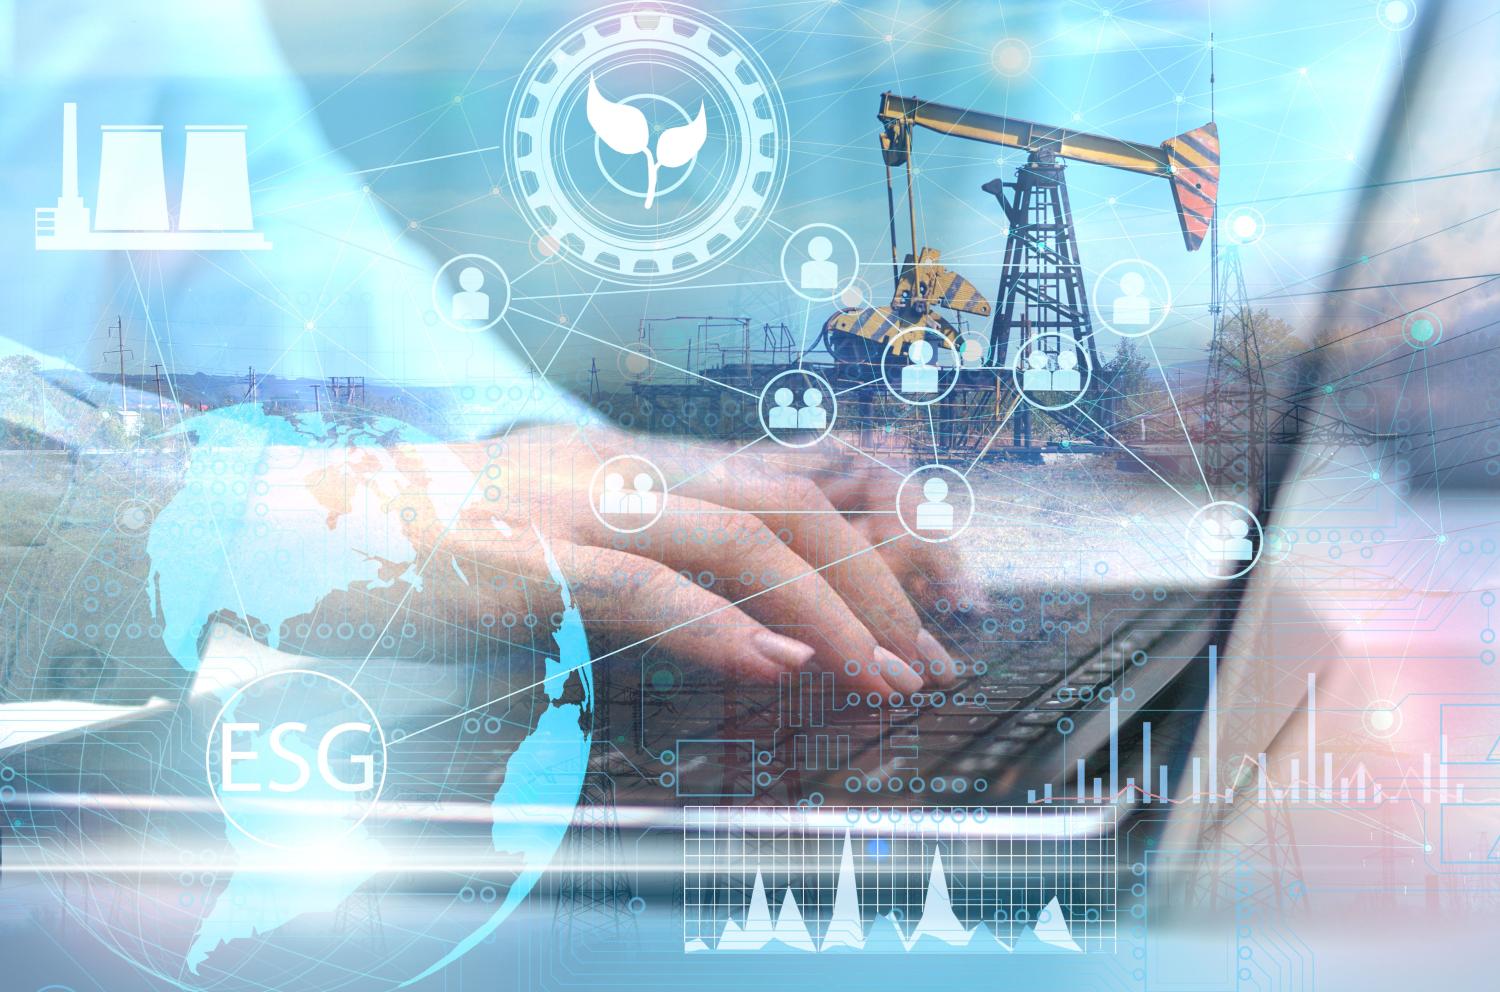 Computer and environmental symbols laid over a photo of an oil well